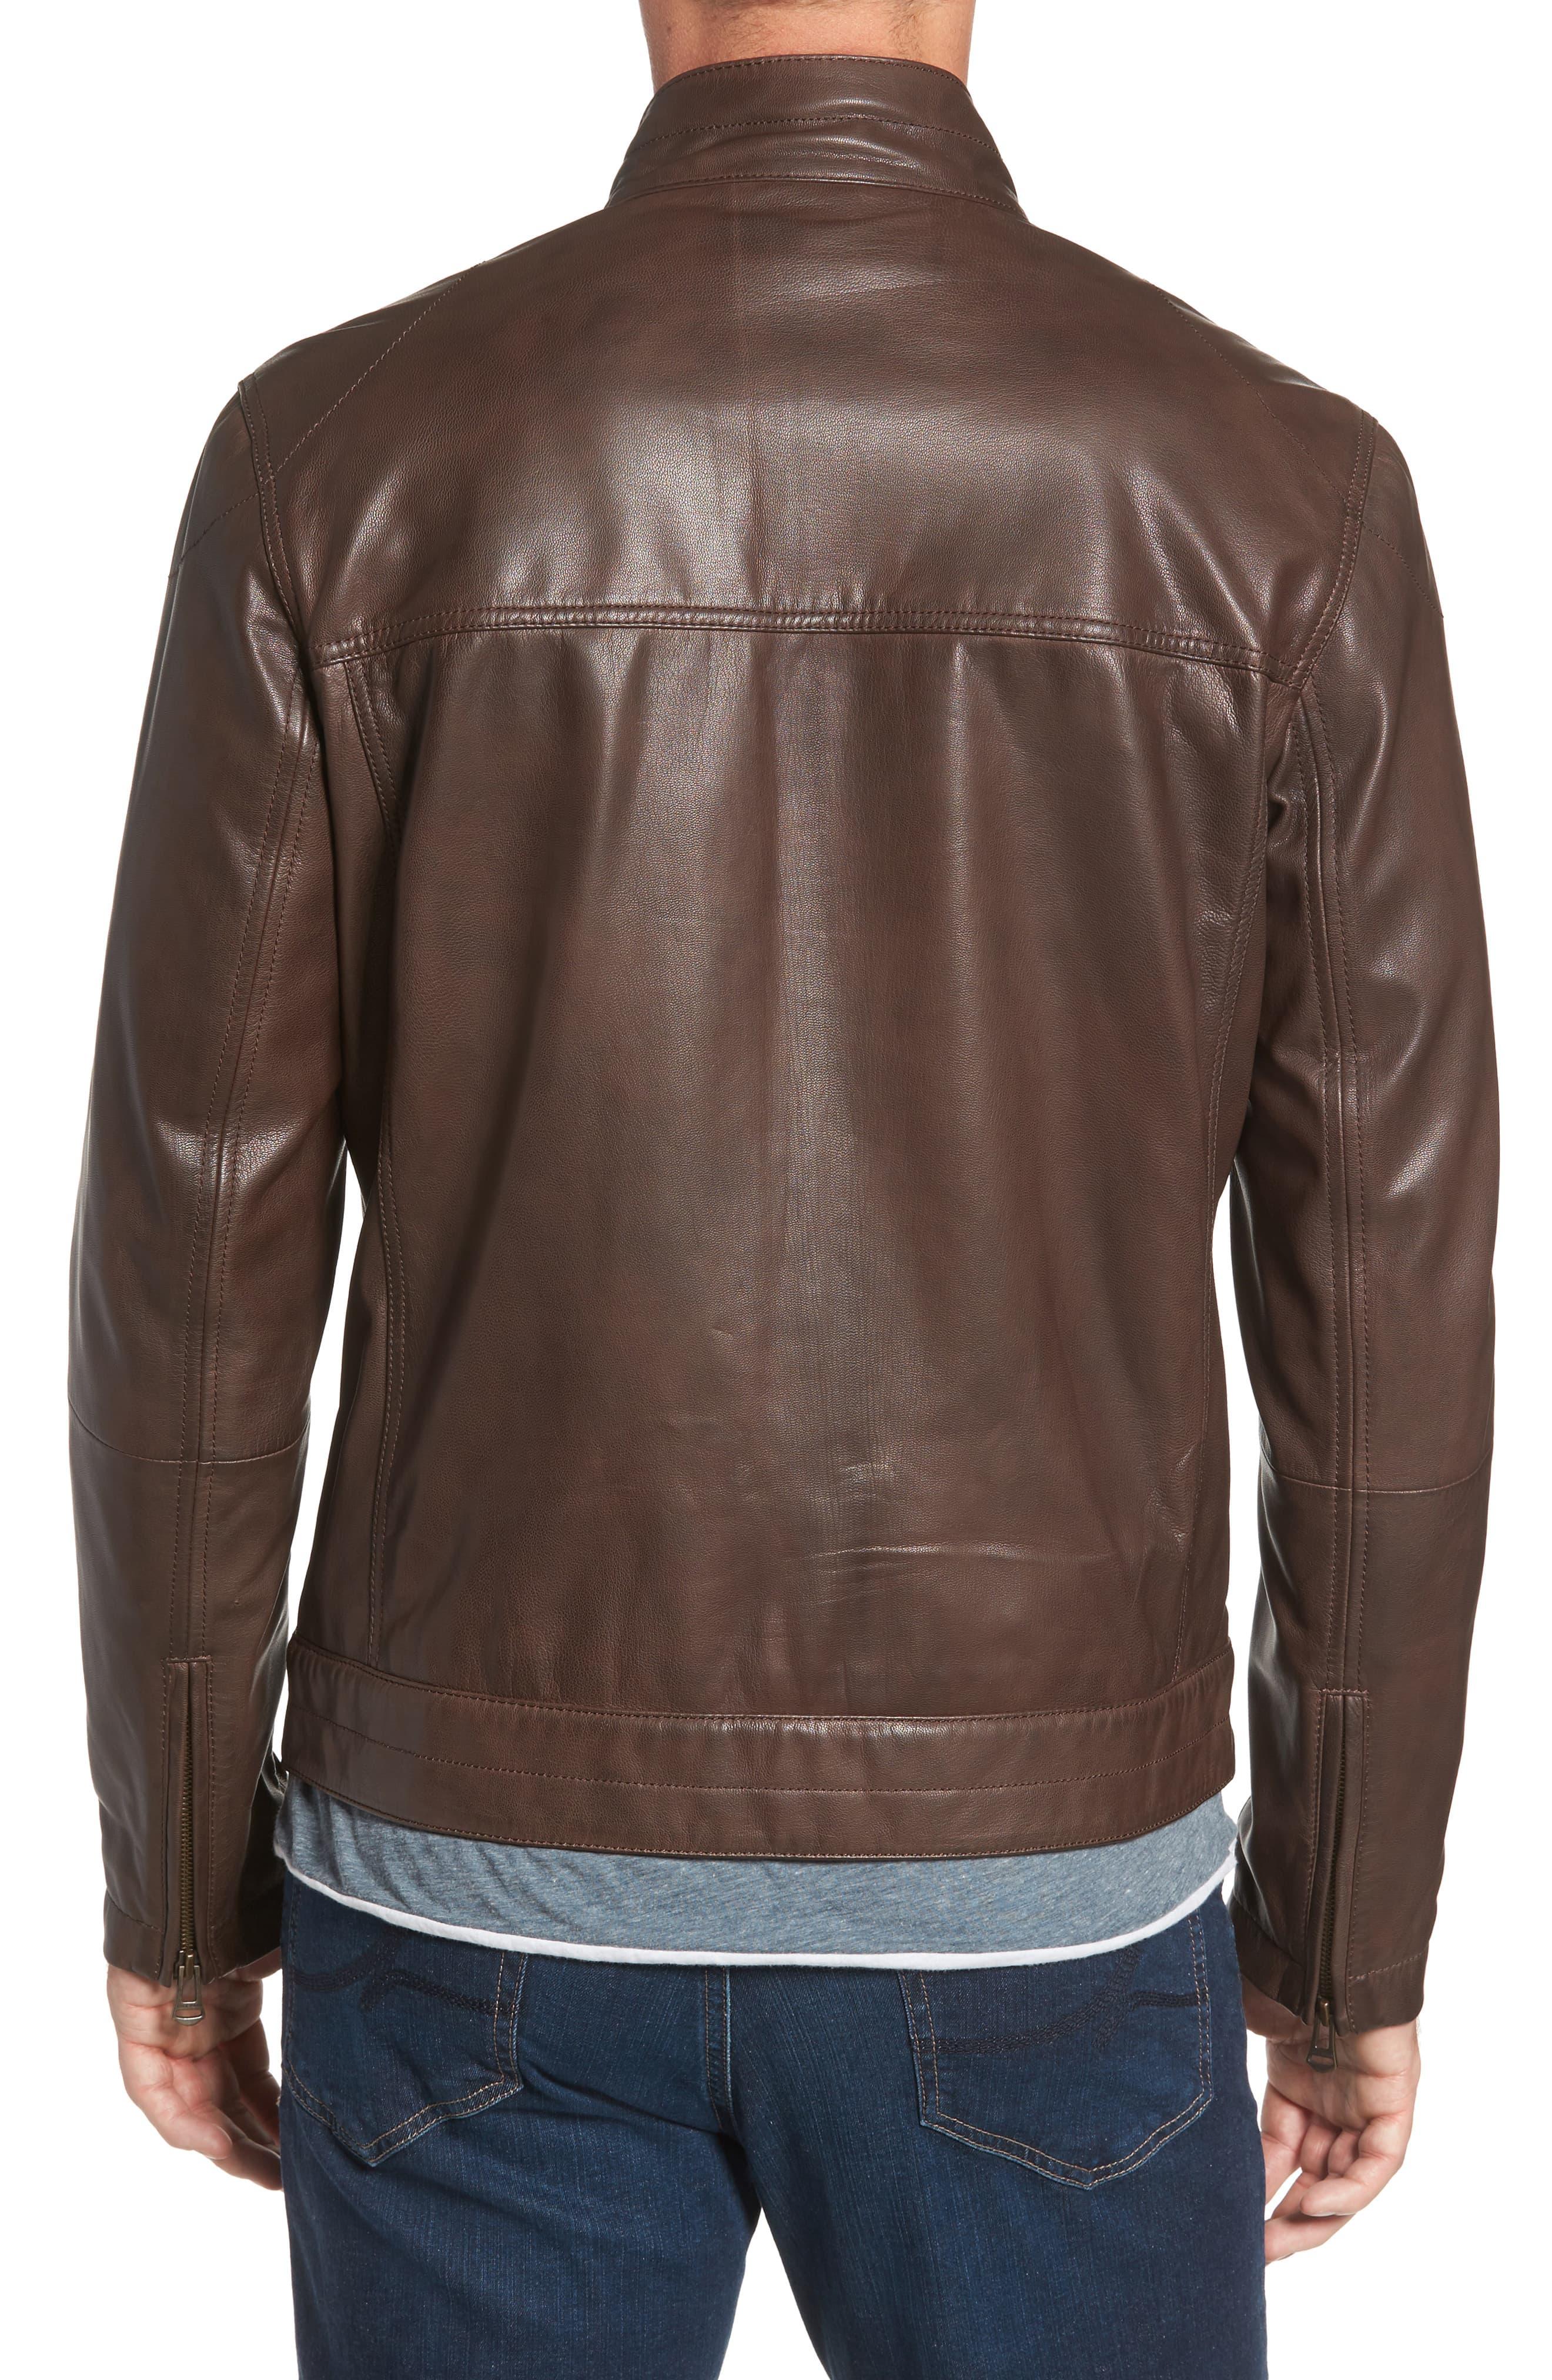 Cole Haan Washed Leather Trucker Jacket in Brown for Men - Lyst